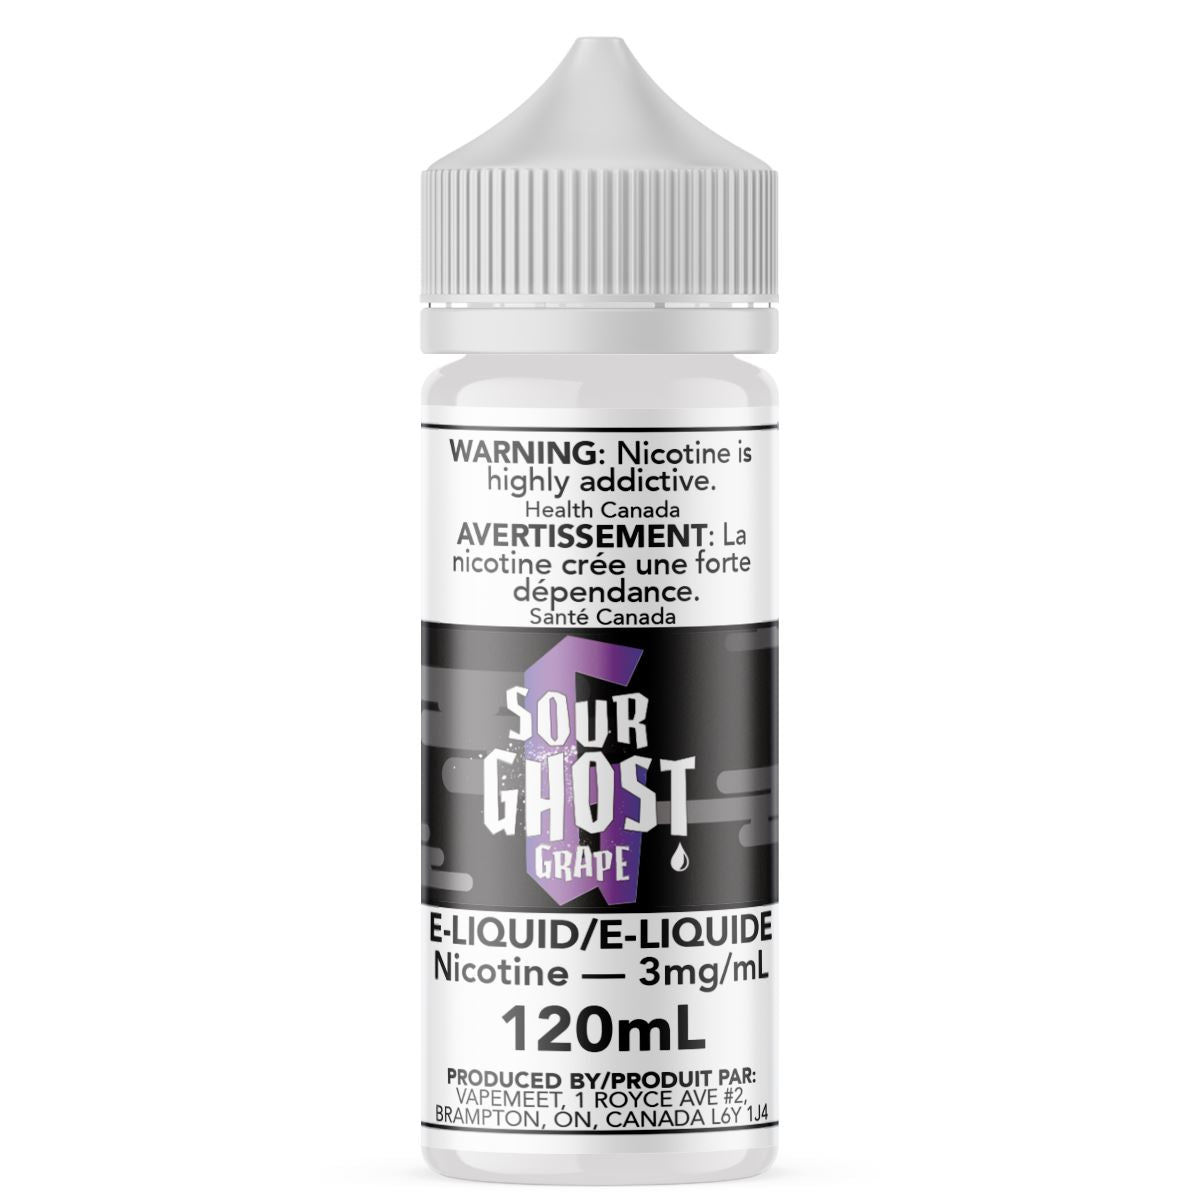 Ghosted - Sour Ghost Grape E-Liquid Ghosted 120mL 0 mg/mL 